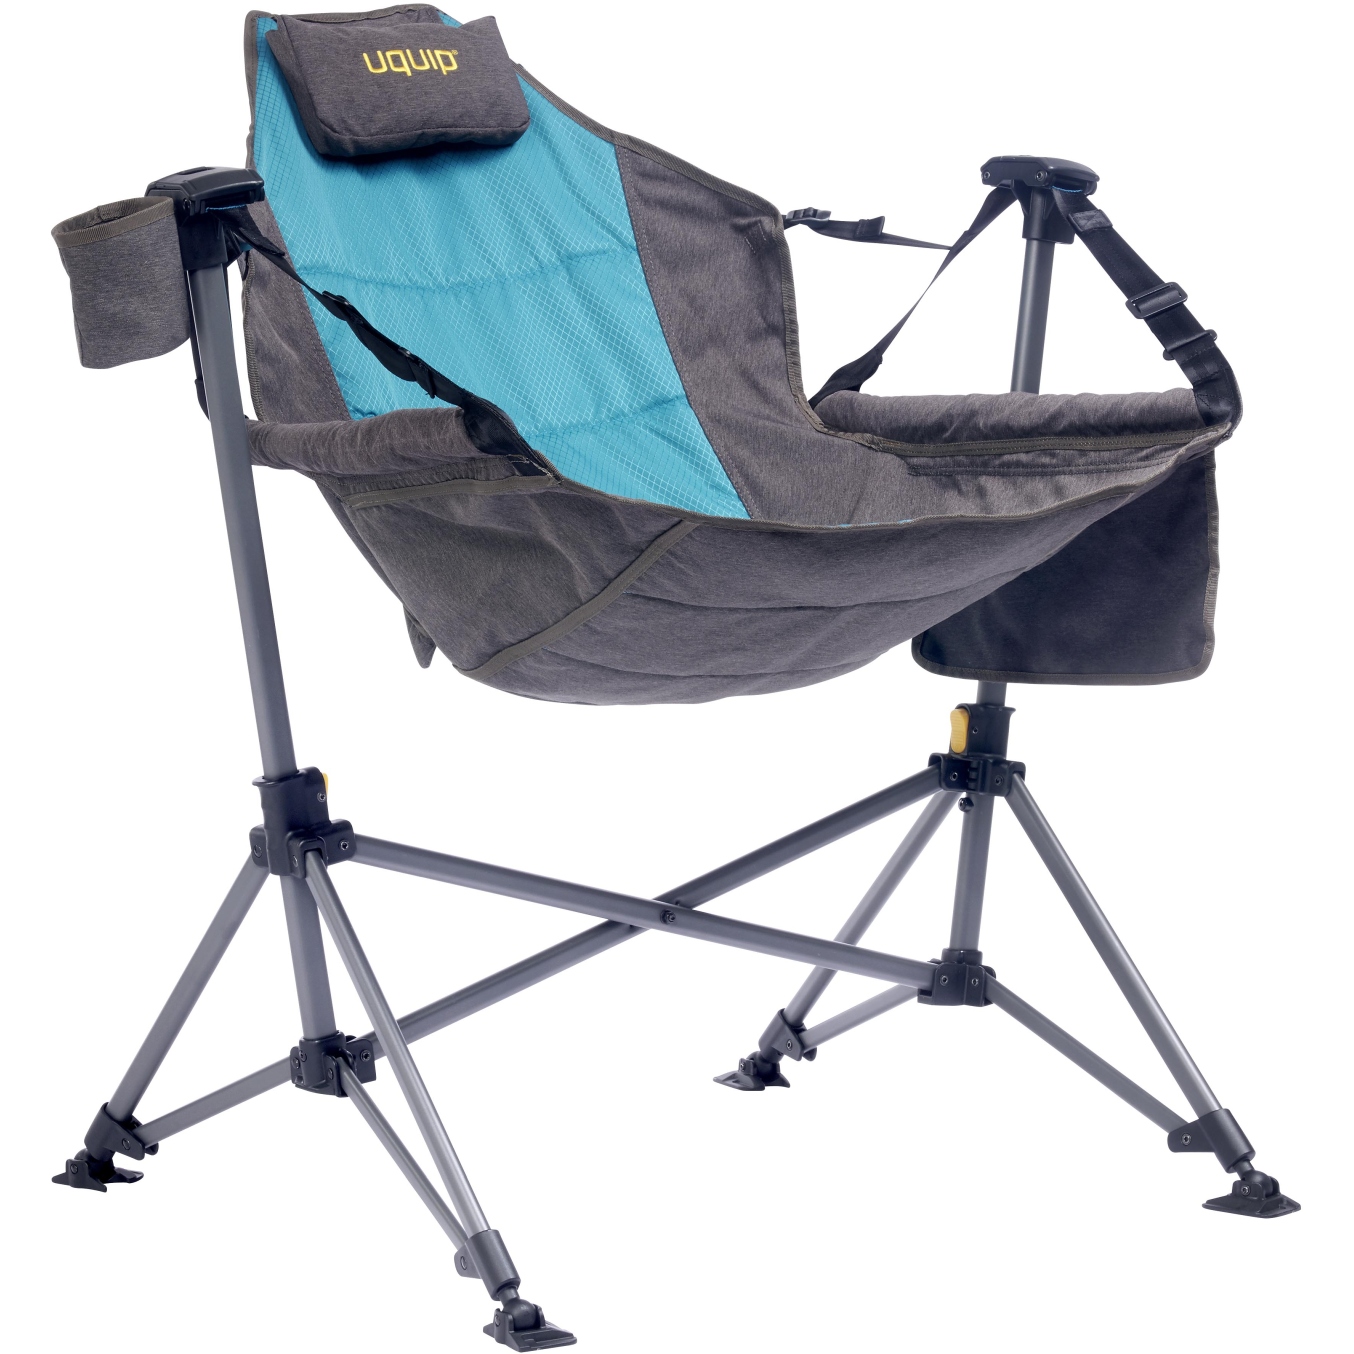 Picture of Uquip Rocky 2.0 Rocking Chair - petrol/grey